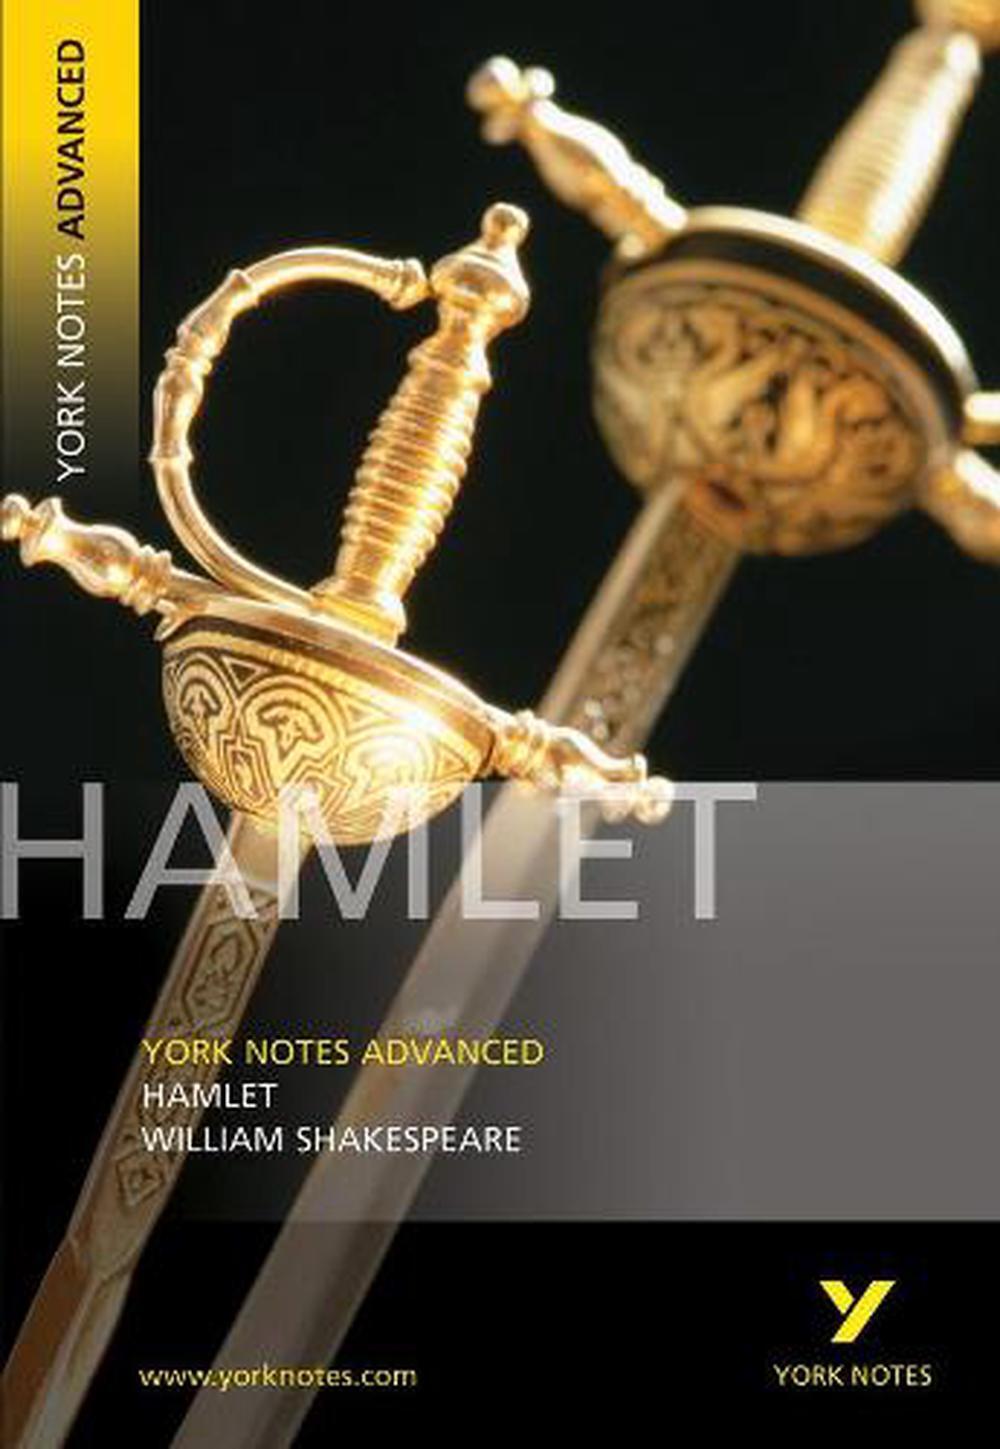 Hamlet: York Notes Advanced: everything you need to catch up, study and prepare